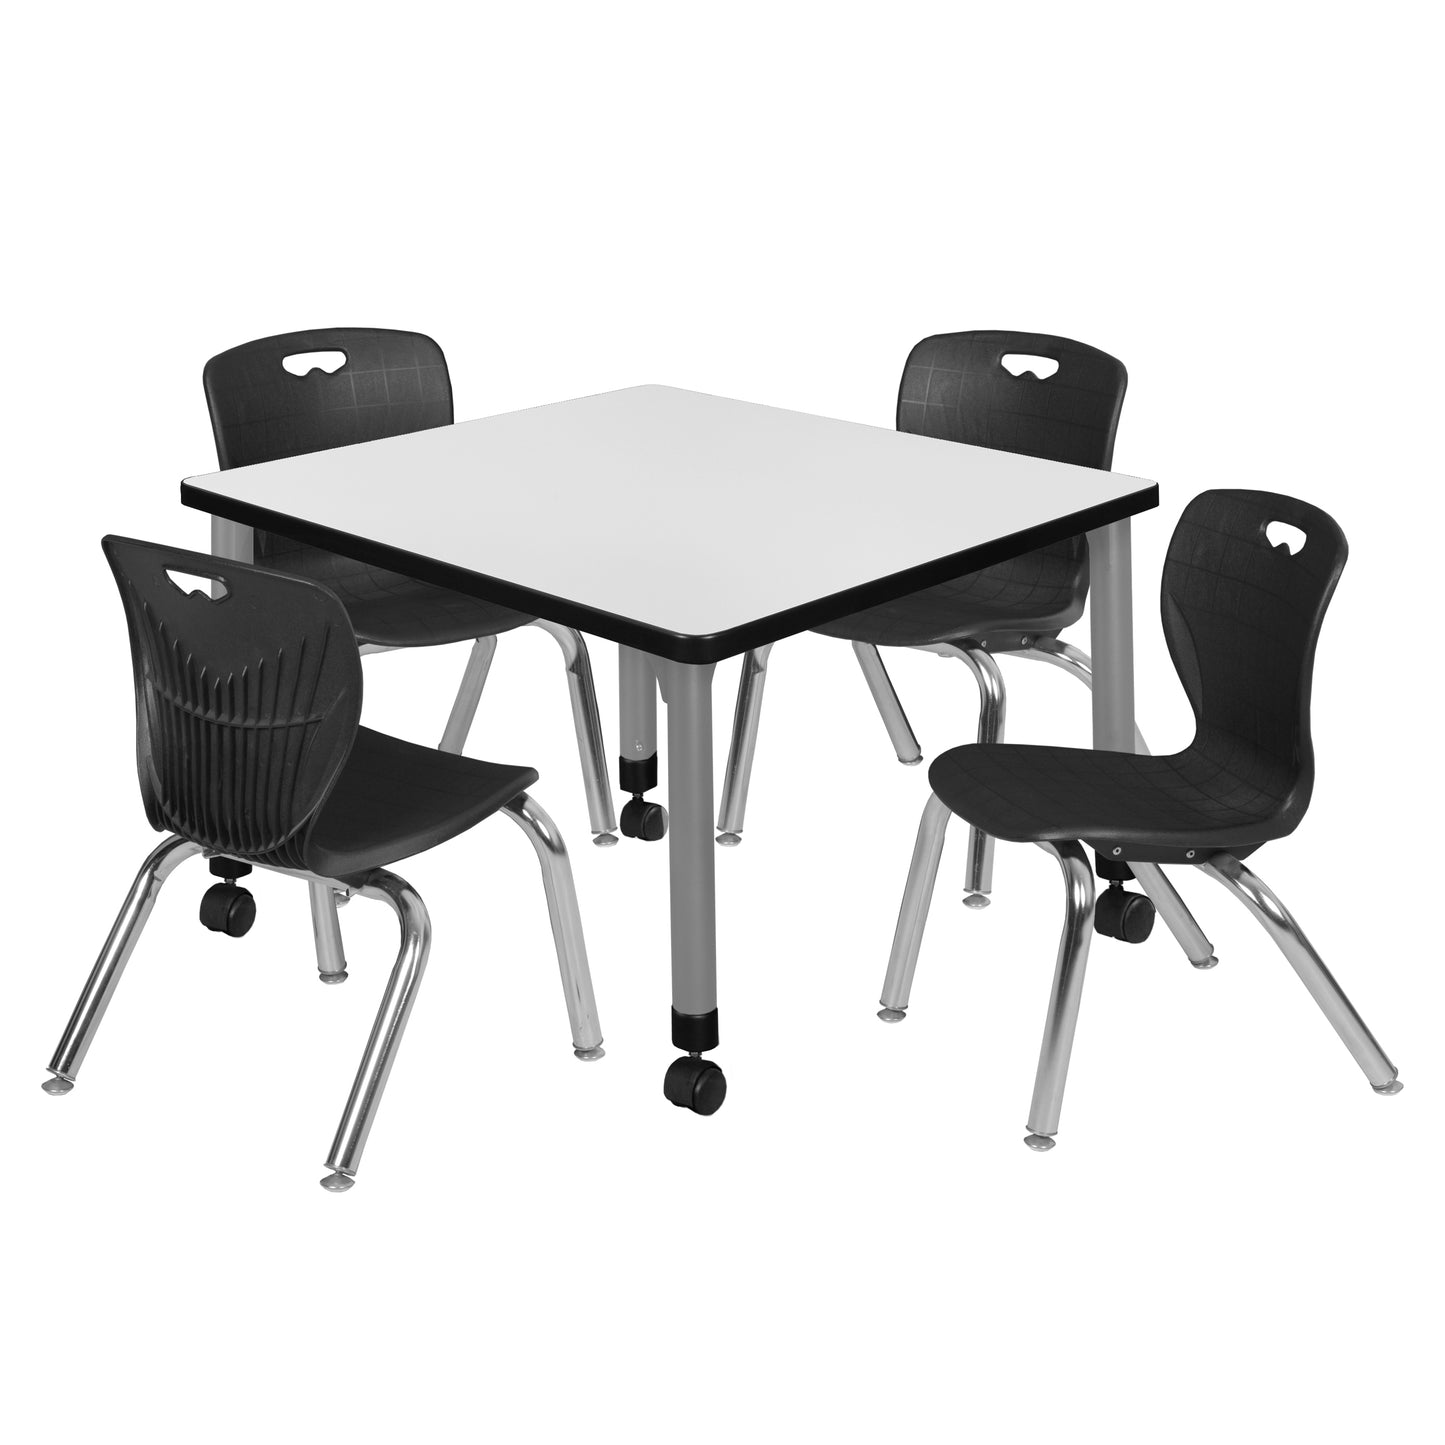 Regency Kee 30 in. Square Adjustable Classroom Table & 4 Andy 12 in. Stack Chairs